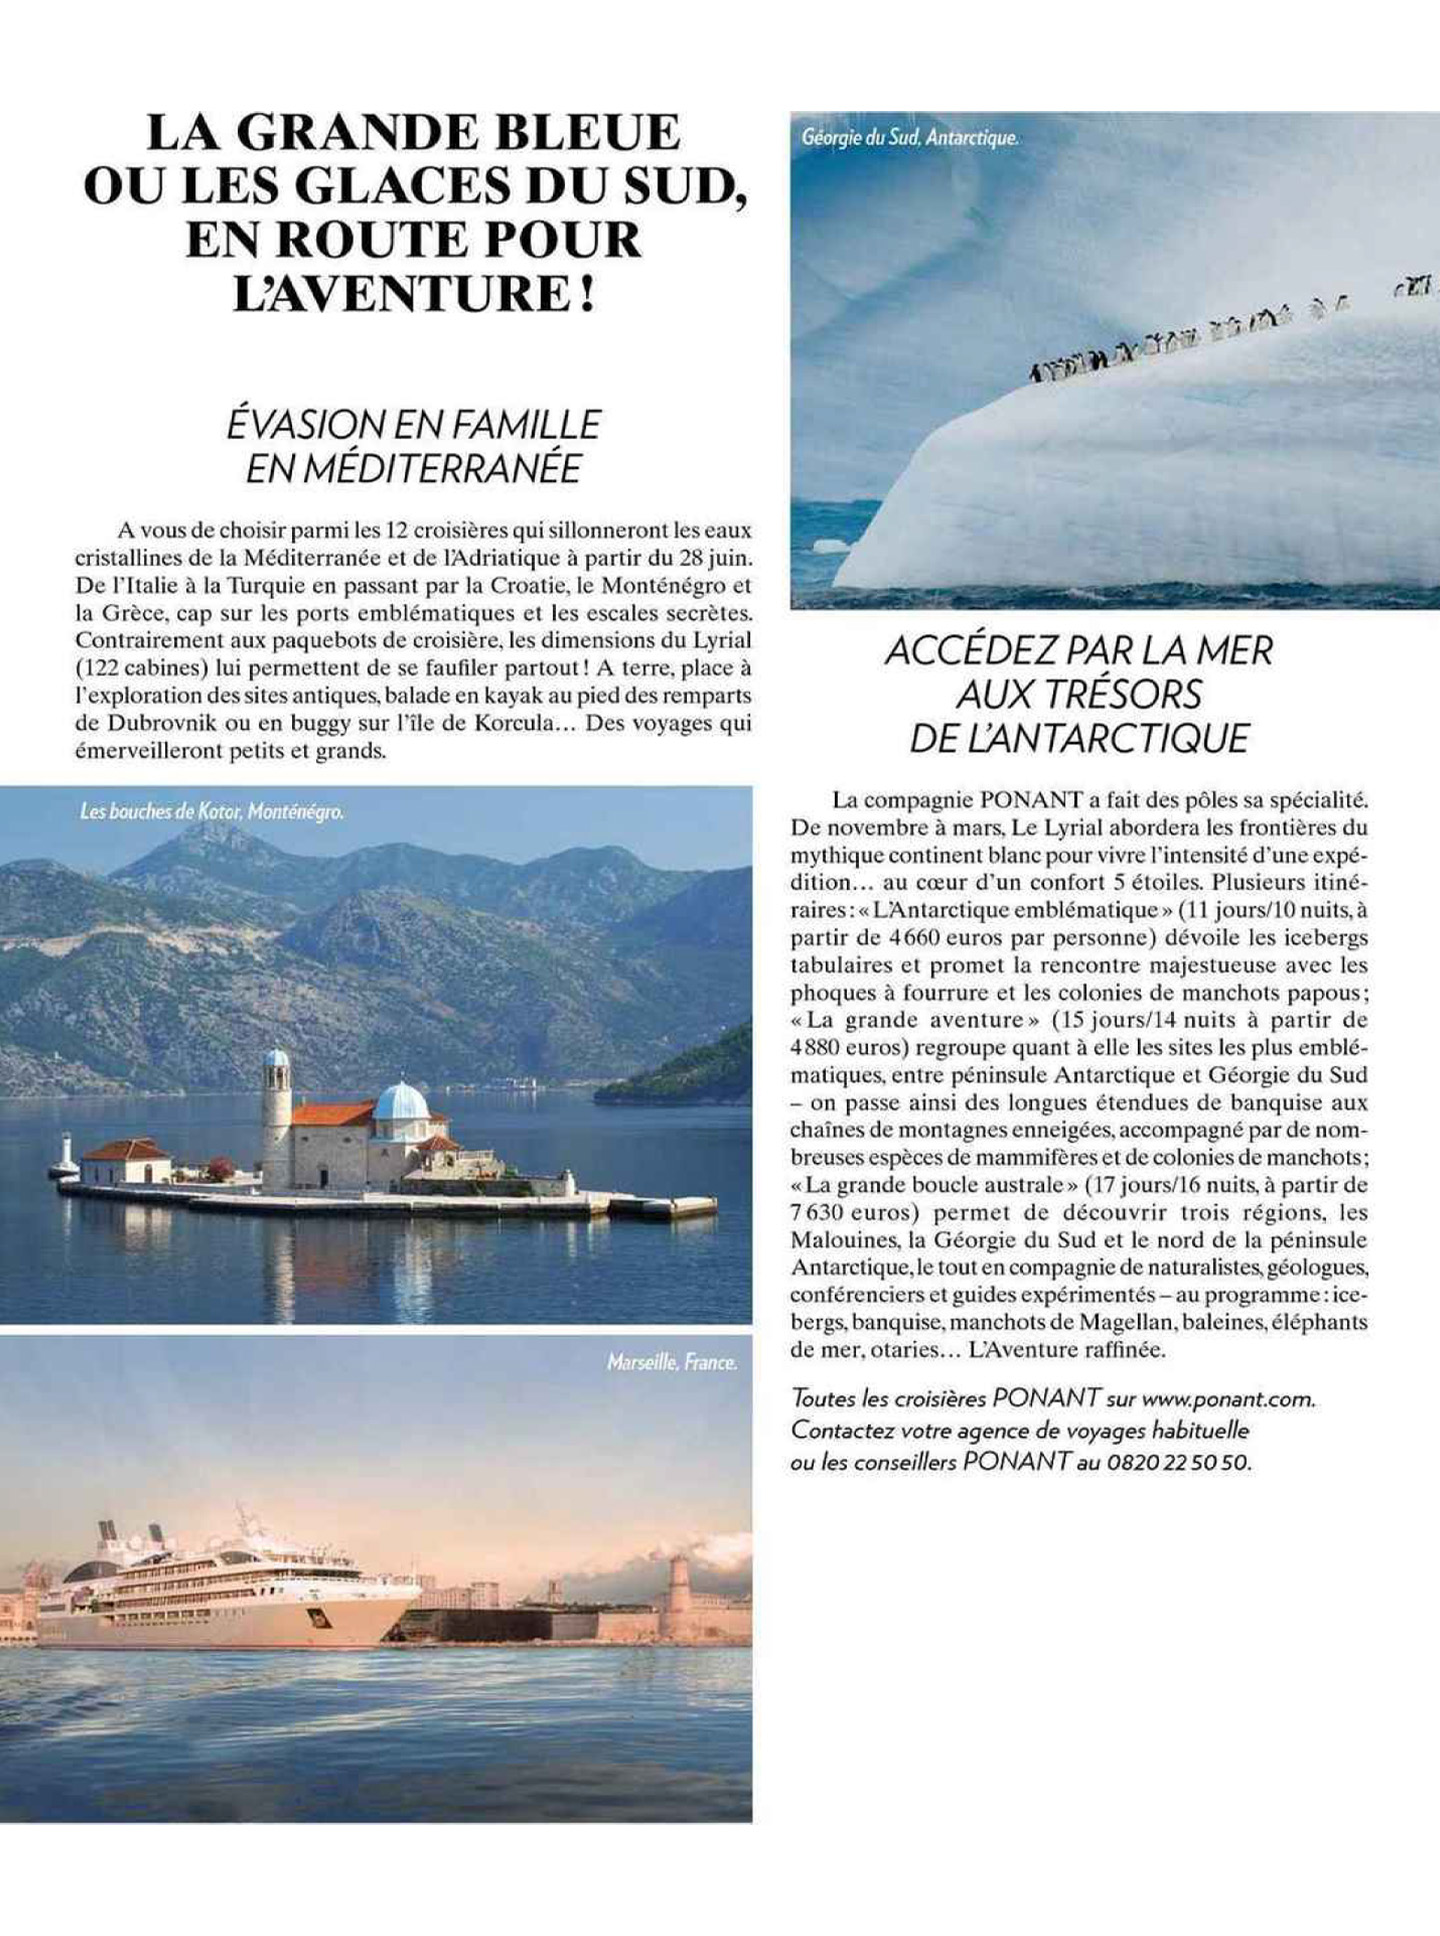 article on the lyrial de ponant in paris match magazine, a 5 star luxury hotel designed by the interior design studio jean-philippe nuel